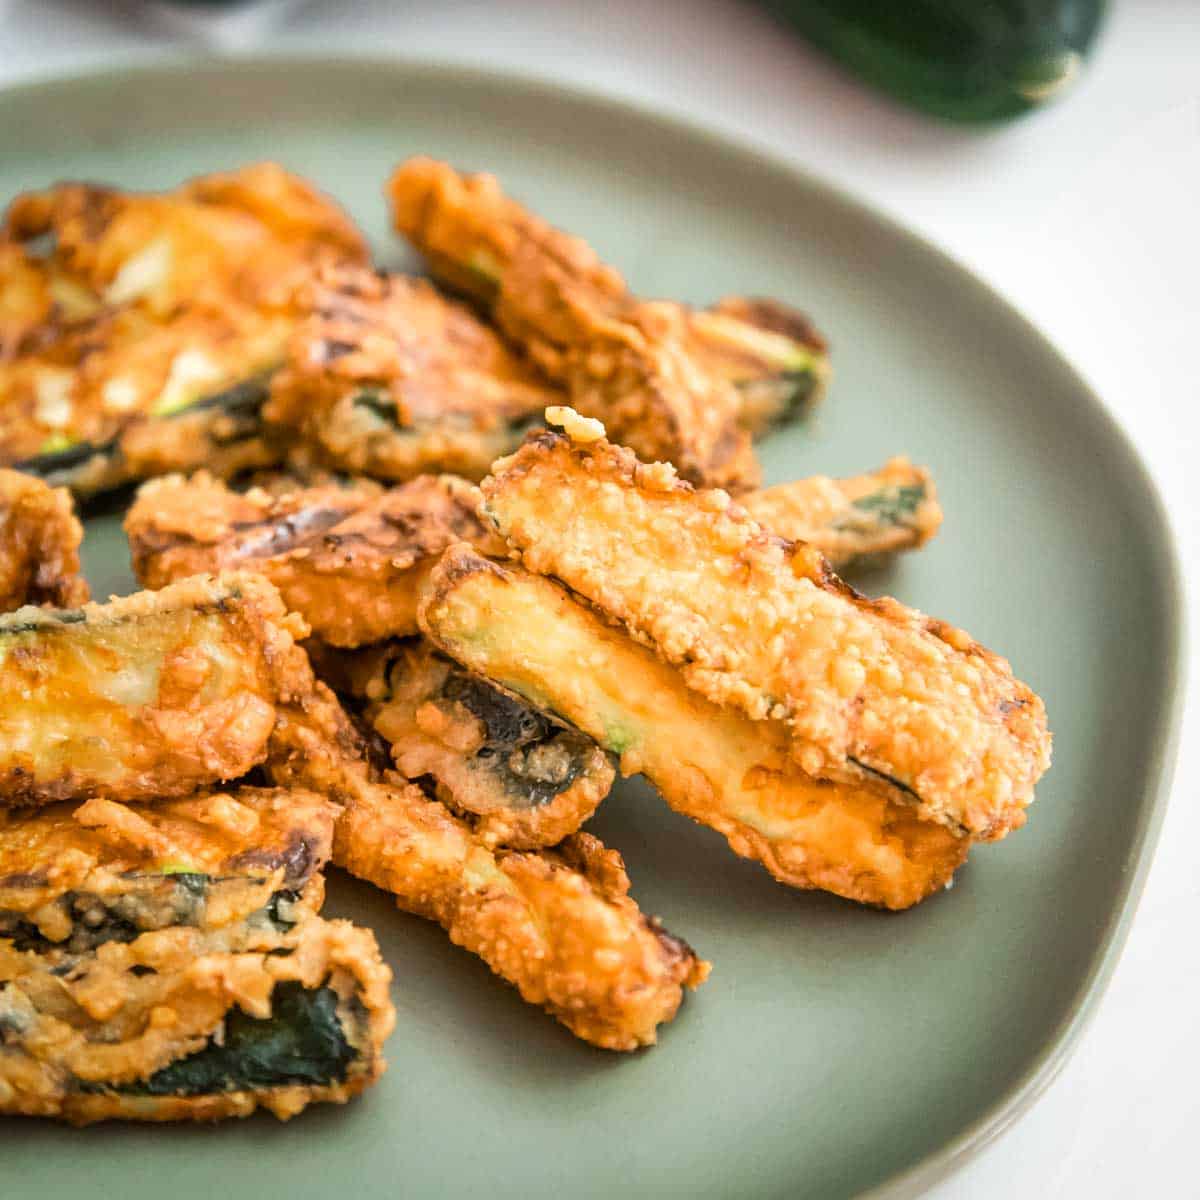 Side shot of multiple zucchini fries on a light green plate with a white background and a whole zucchini in the background.